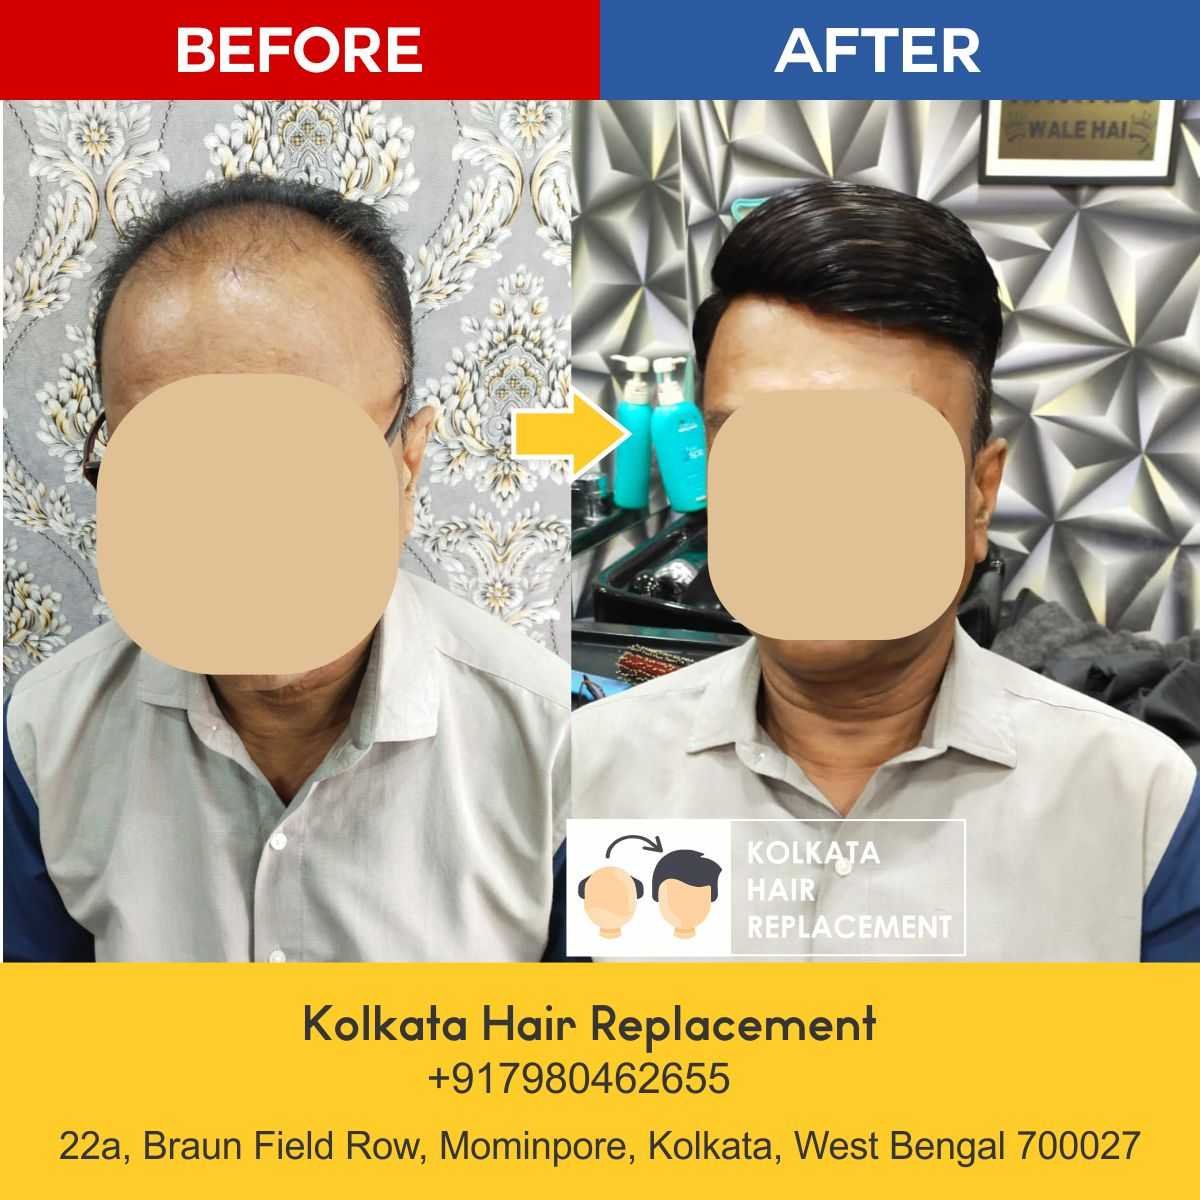 men-hair-wig-patch-kolkata-hair-replacement-before-after-05